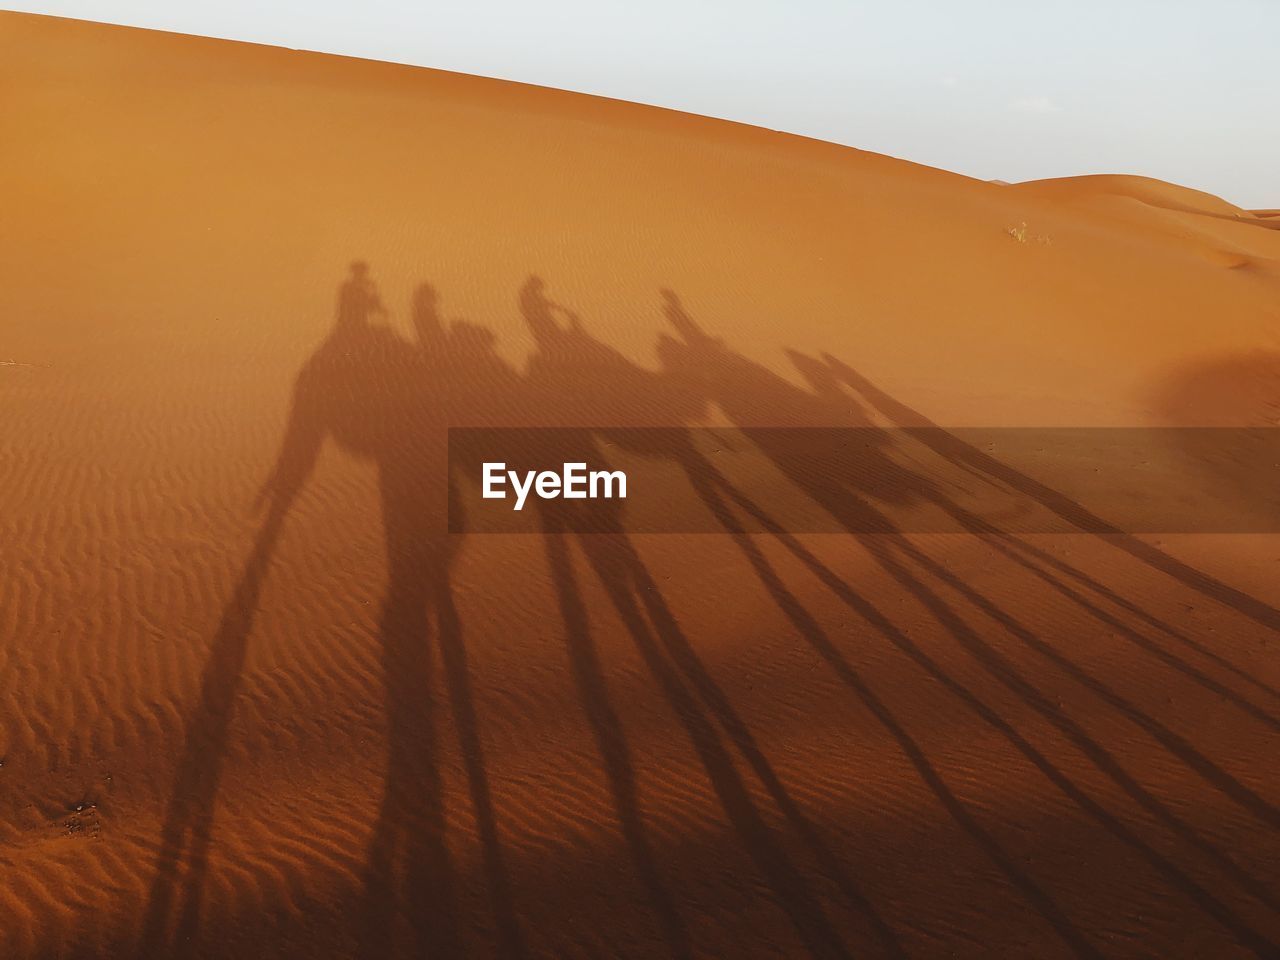 Shadow of people sitting on camel in desert